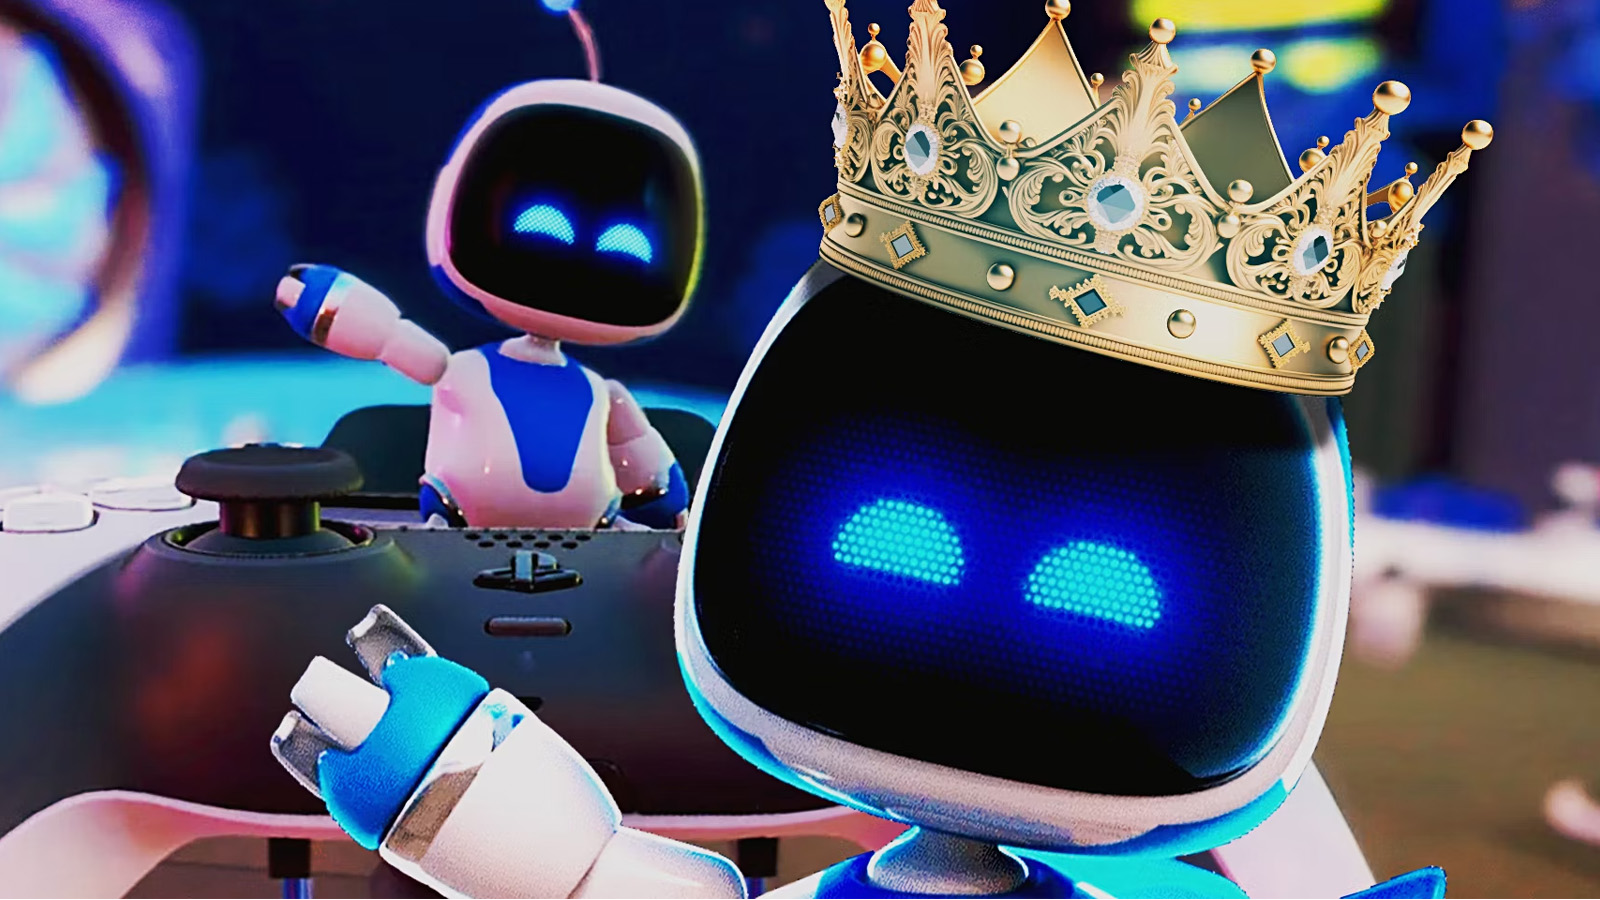 Astro Bot Series Reveal Reportedly Coming Soon as May PlayStation